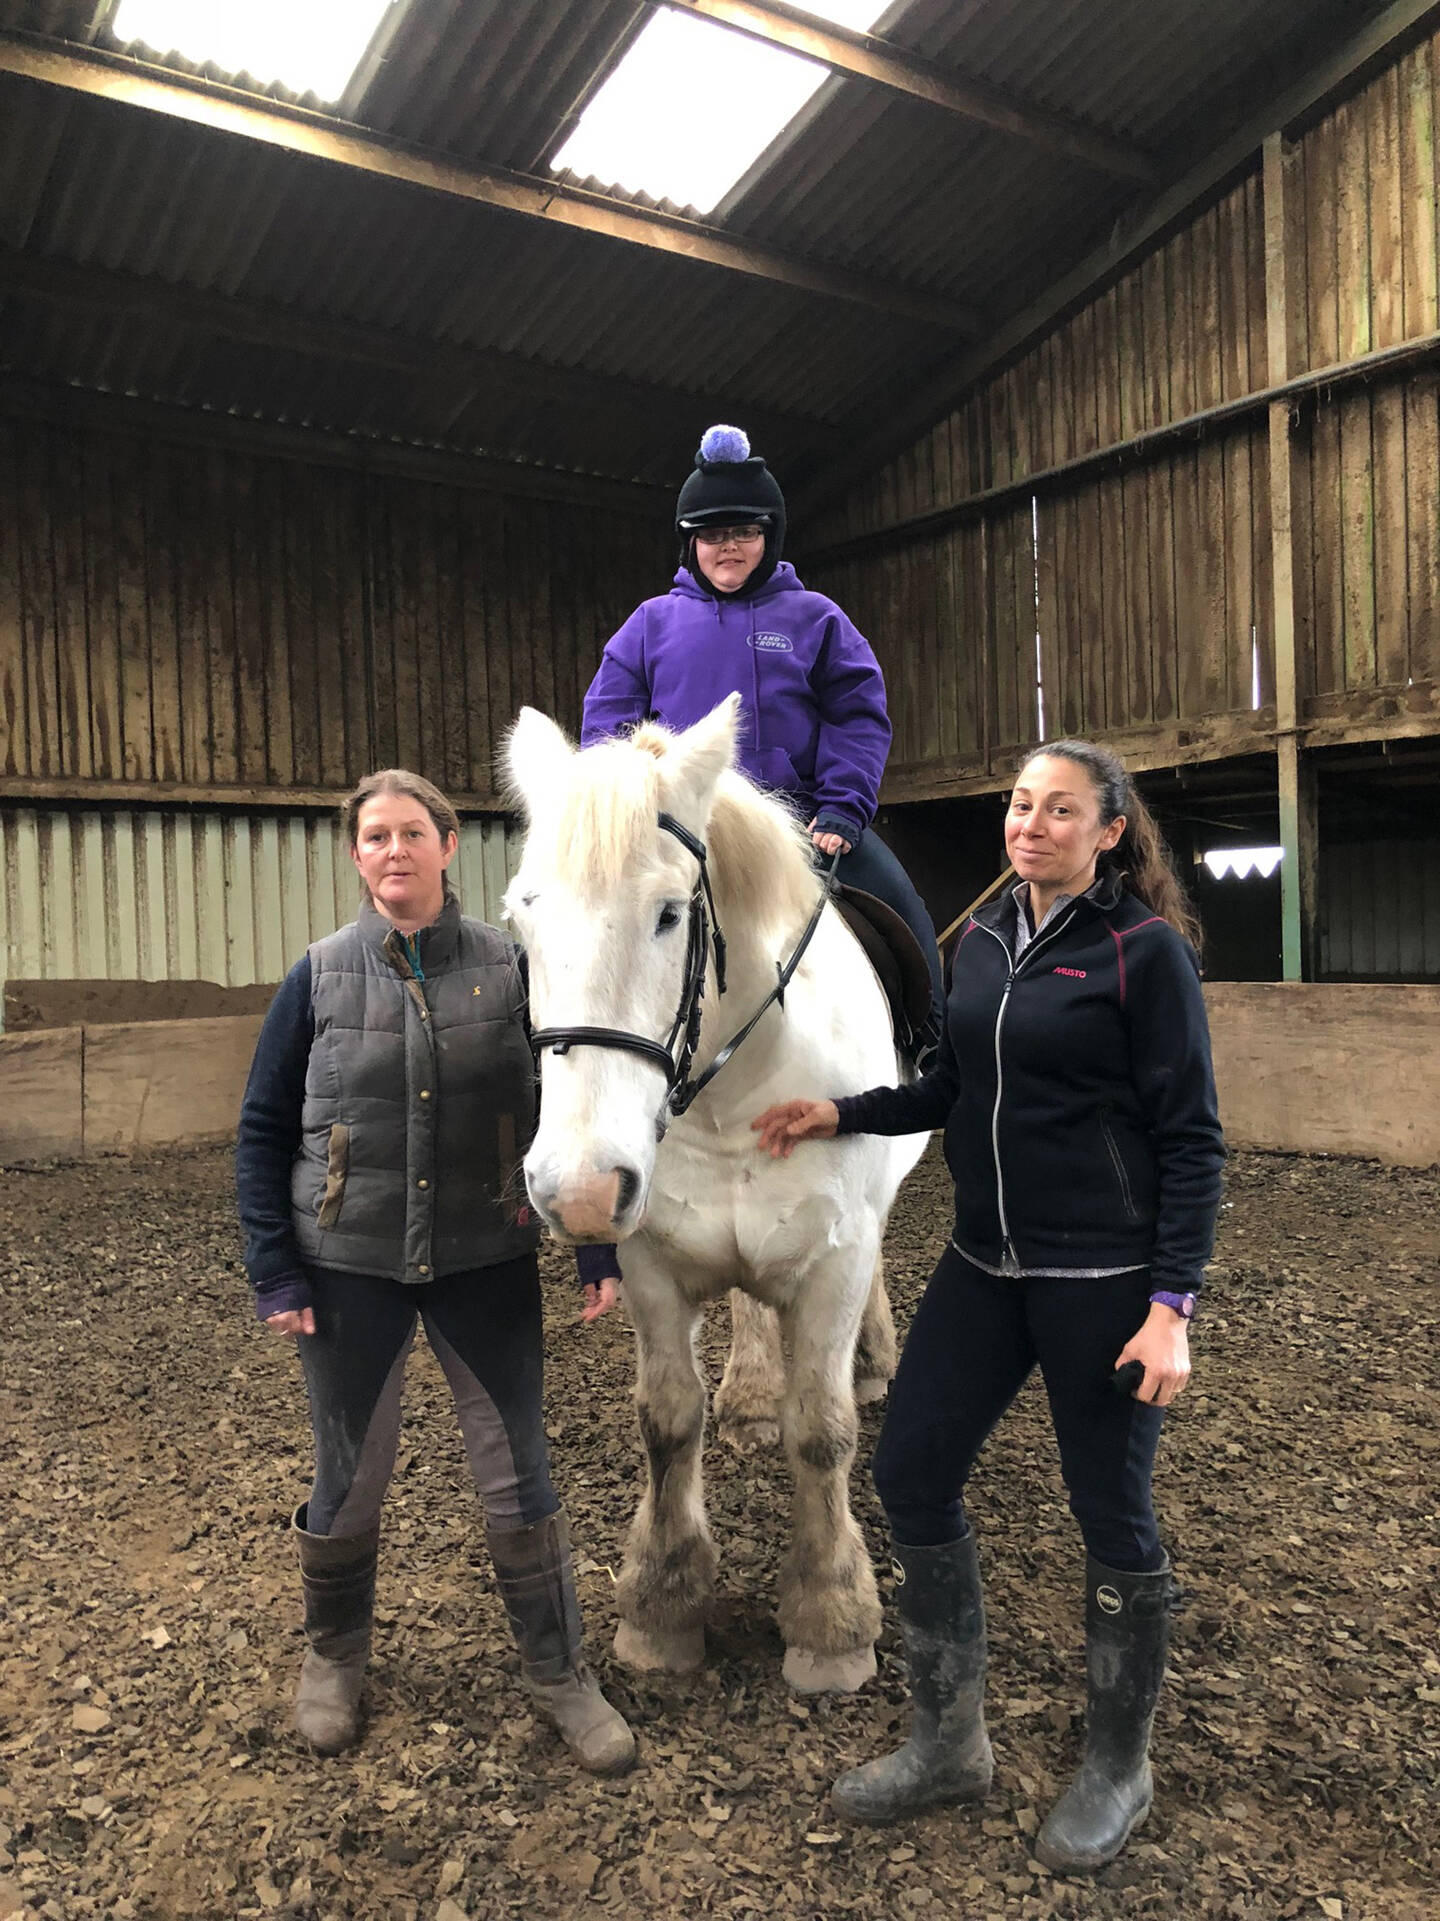 Disabled rider on white horse supported by two RDA volunteers. 